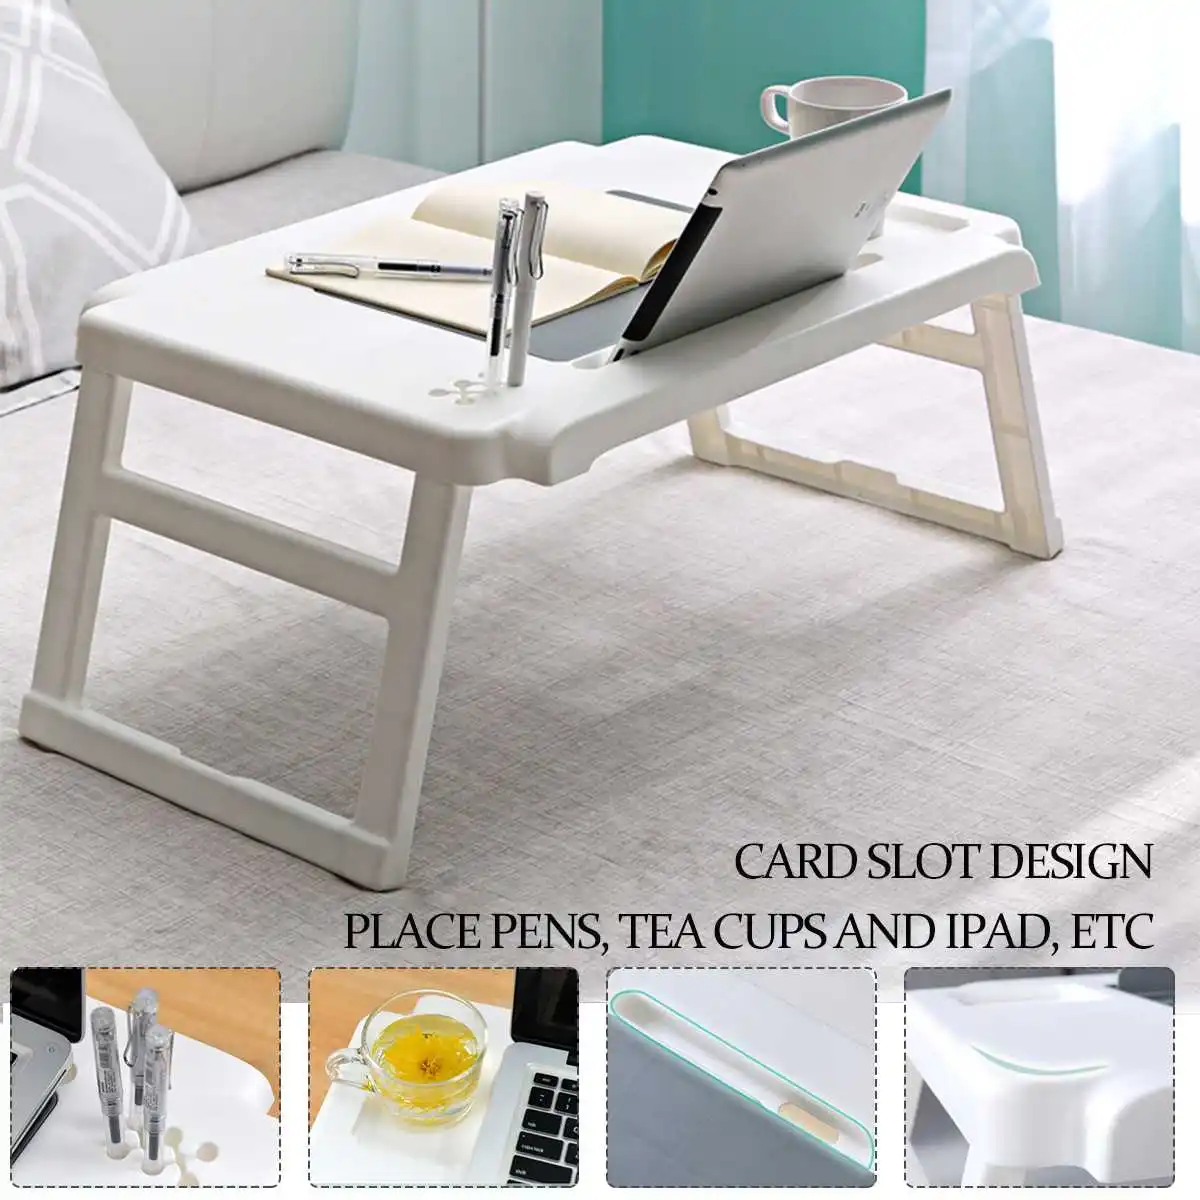 

NEW Portable Desk Laptop Stand Lapdesk Computer Notebook Multi-Function Table Office Breakfast Bed Tray Serving Table